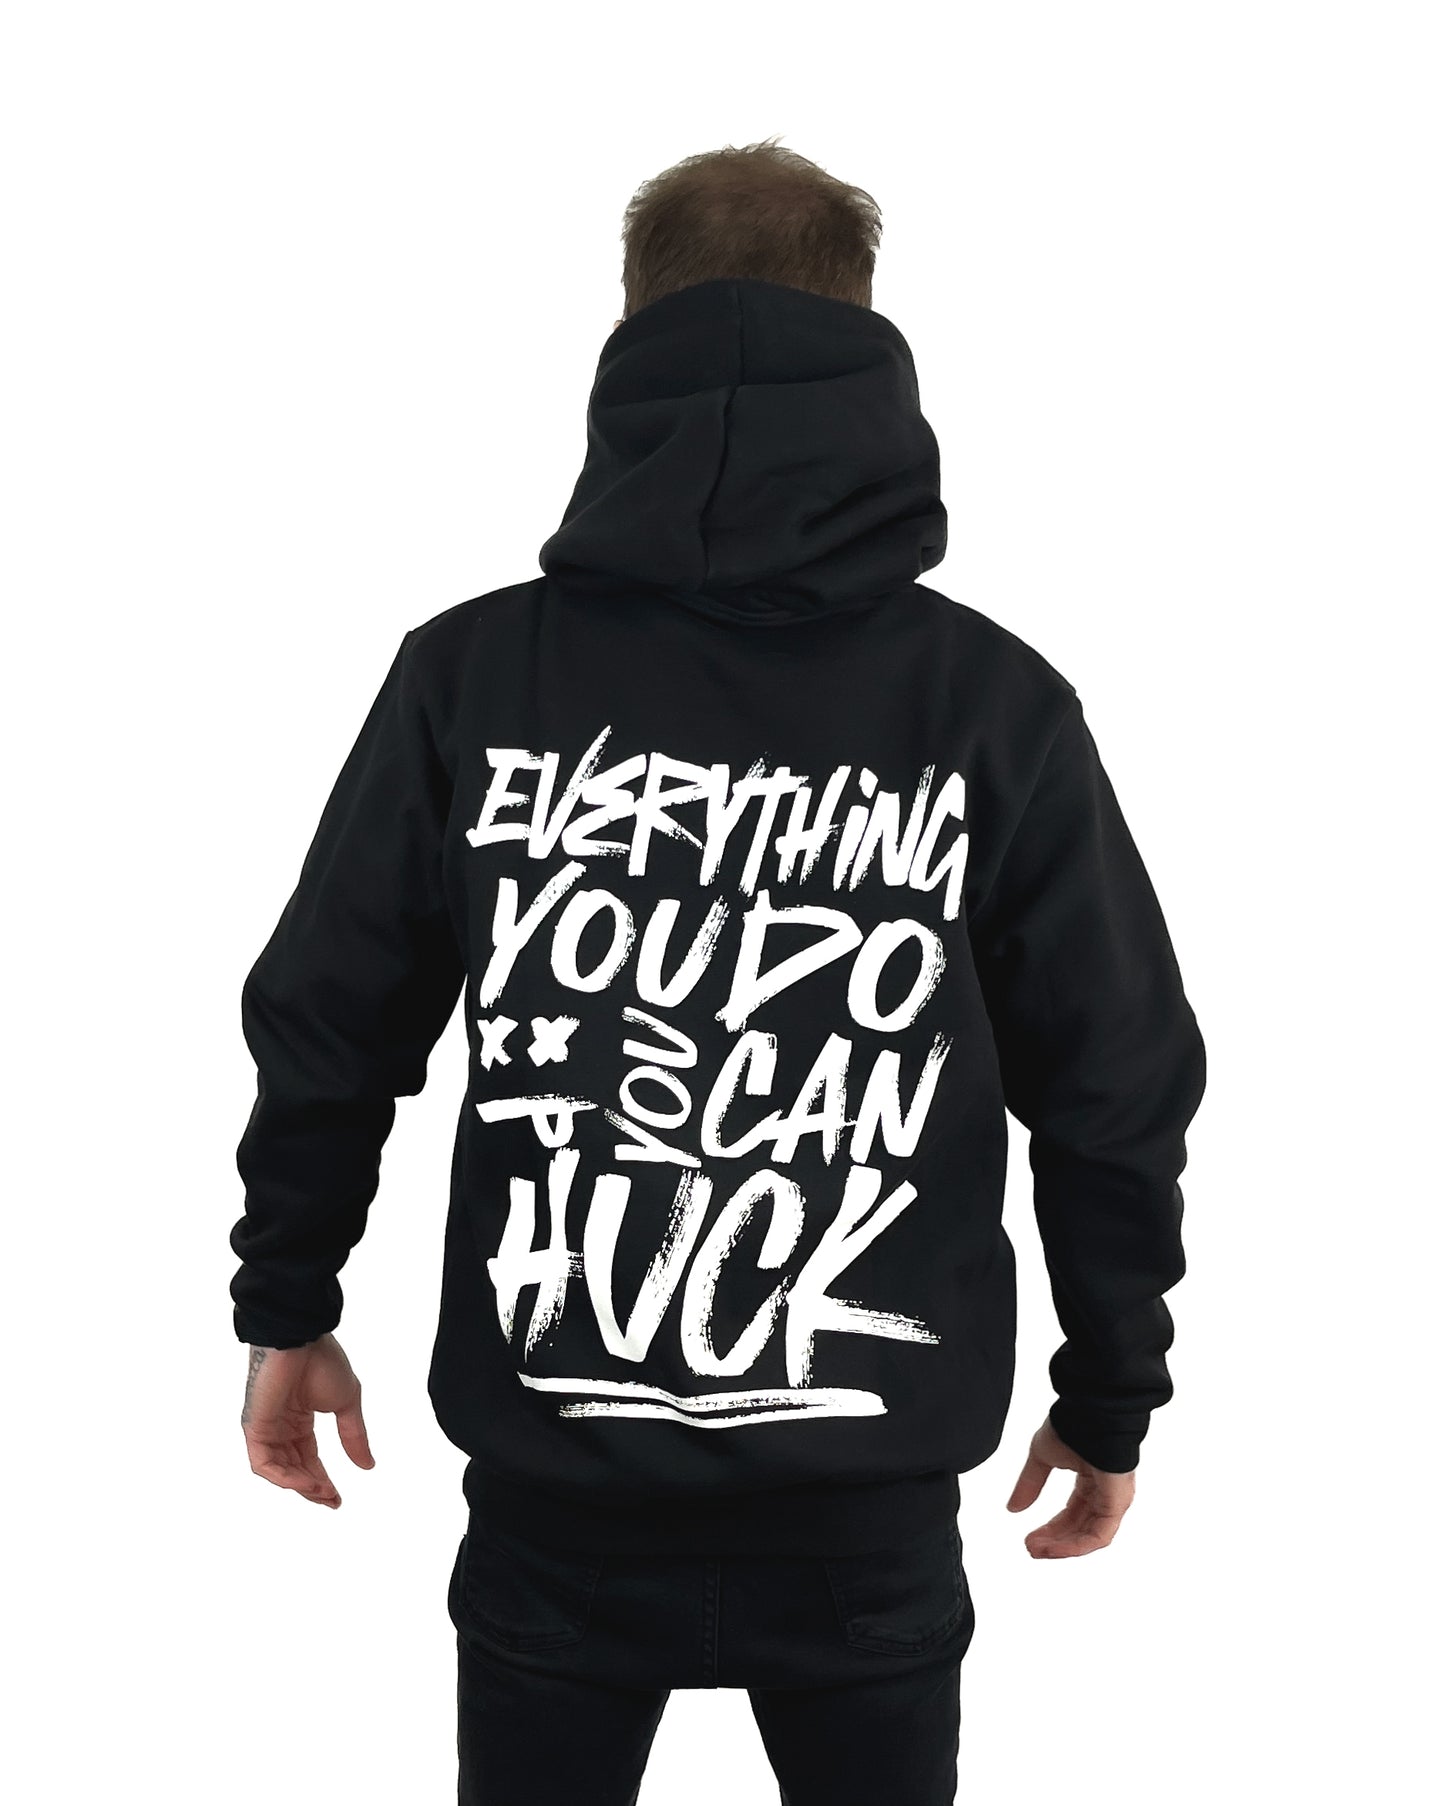 THE MOTTO HOODIE